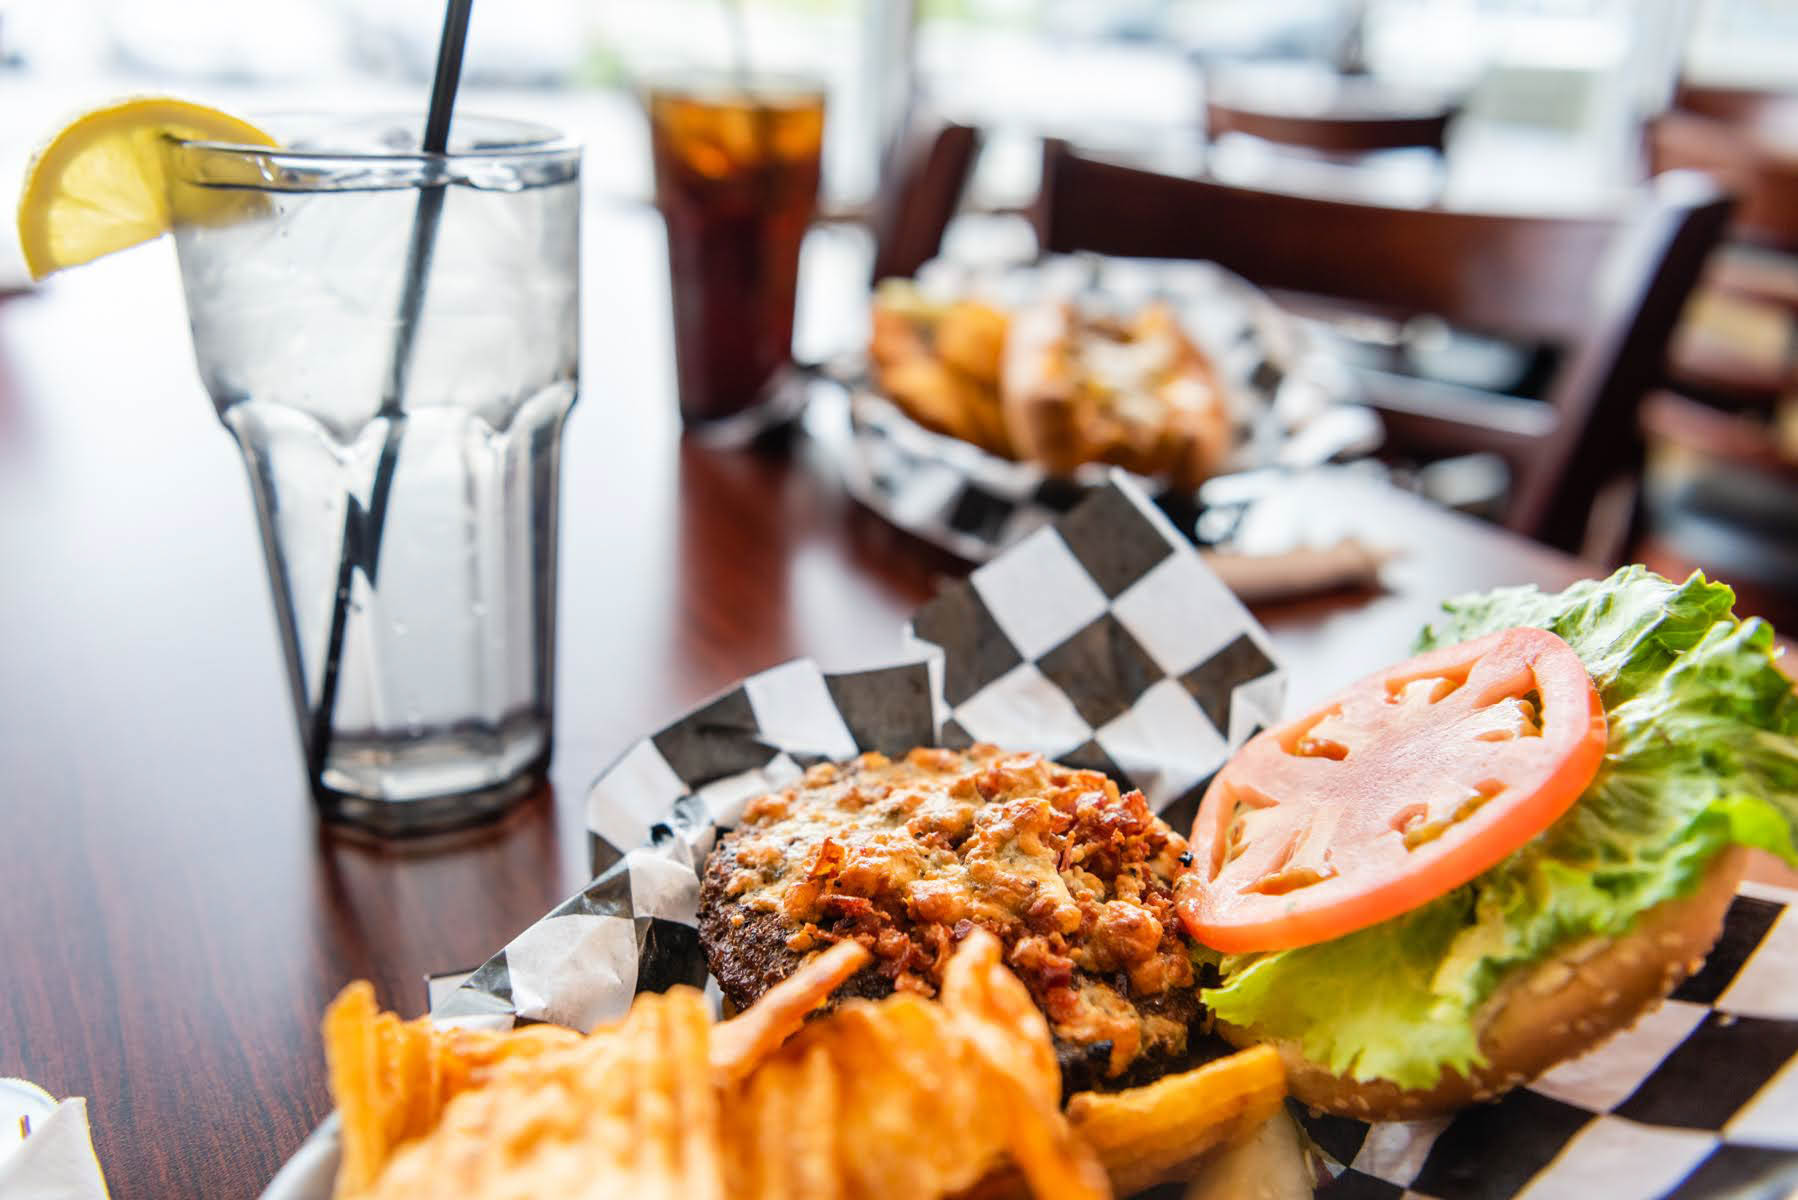 A burger with potato chips and a glass of water with a lemon. Another basket of food and a glass of soda out of focus in the background